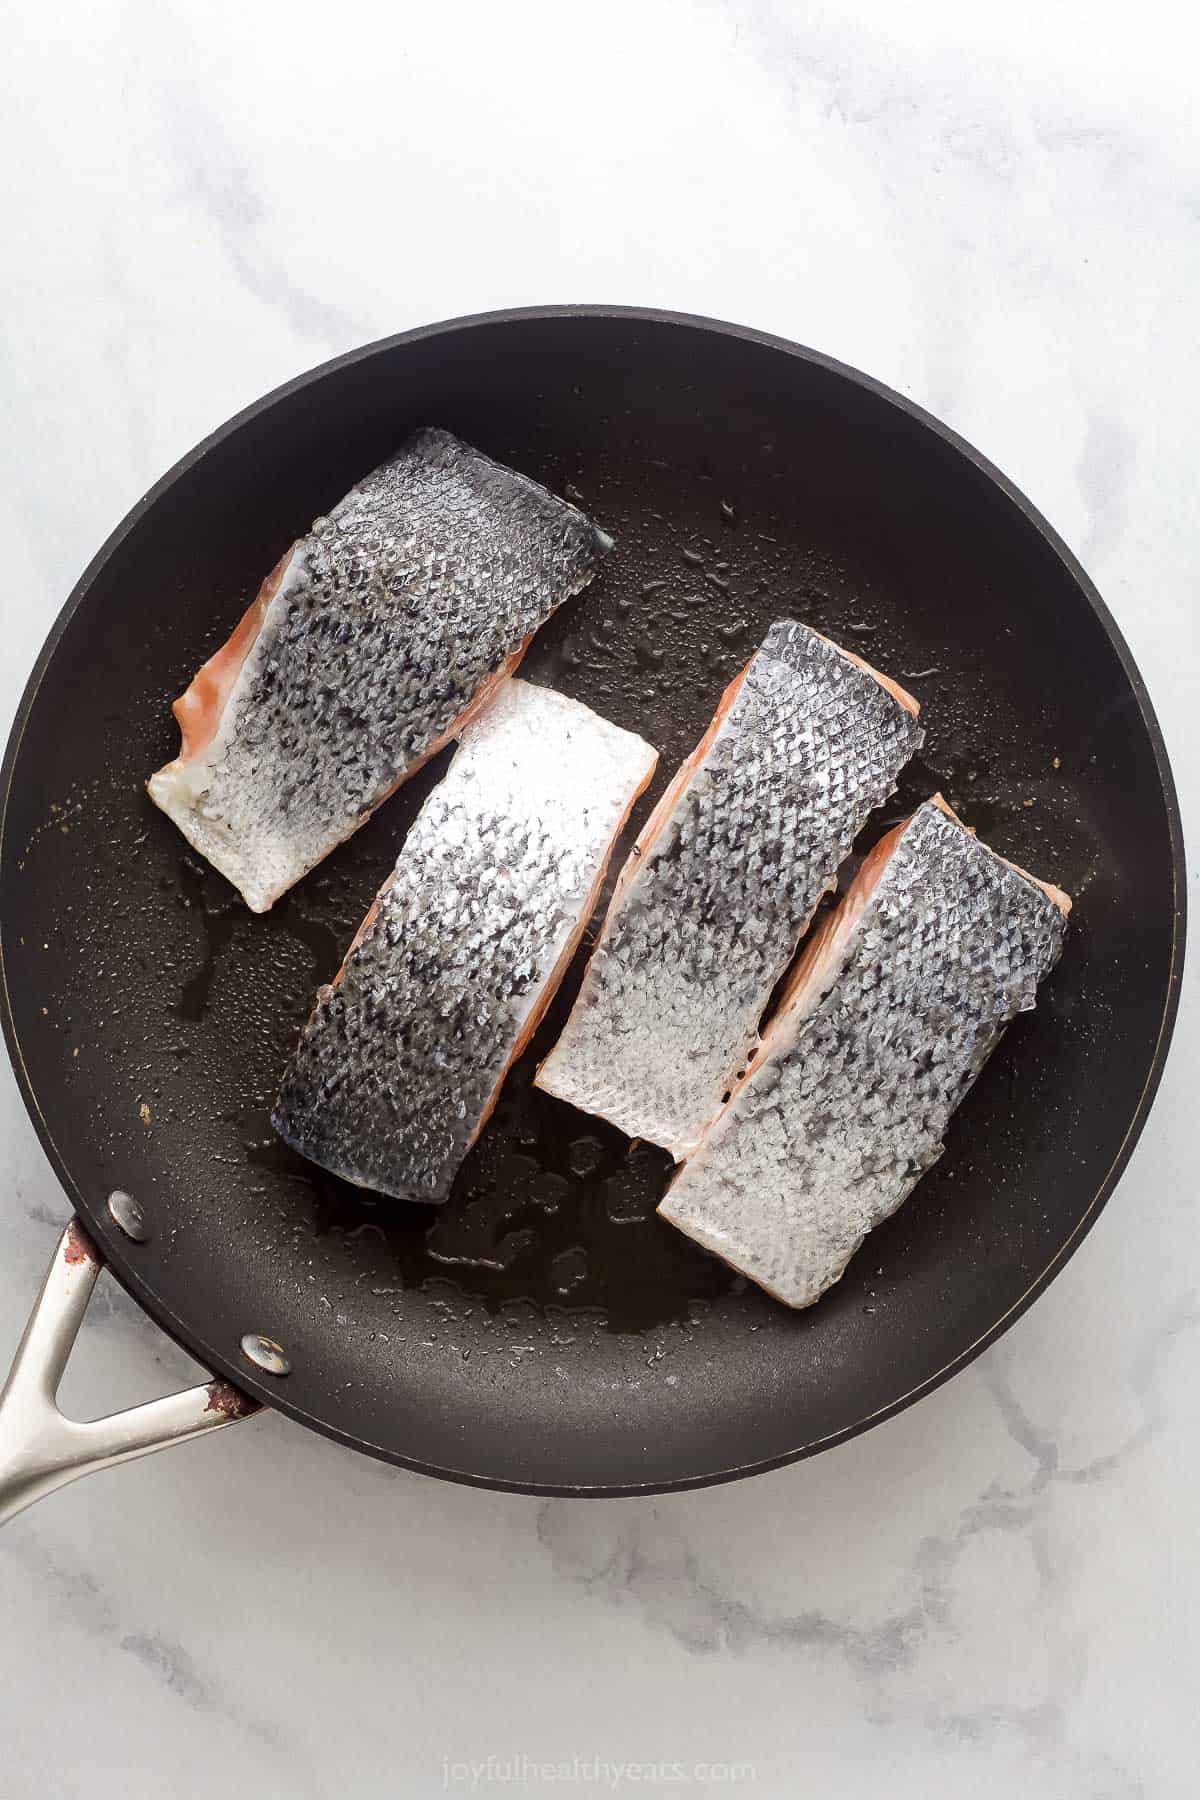 Searing the salmon with the skin facing upwards.